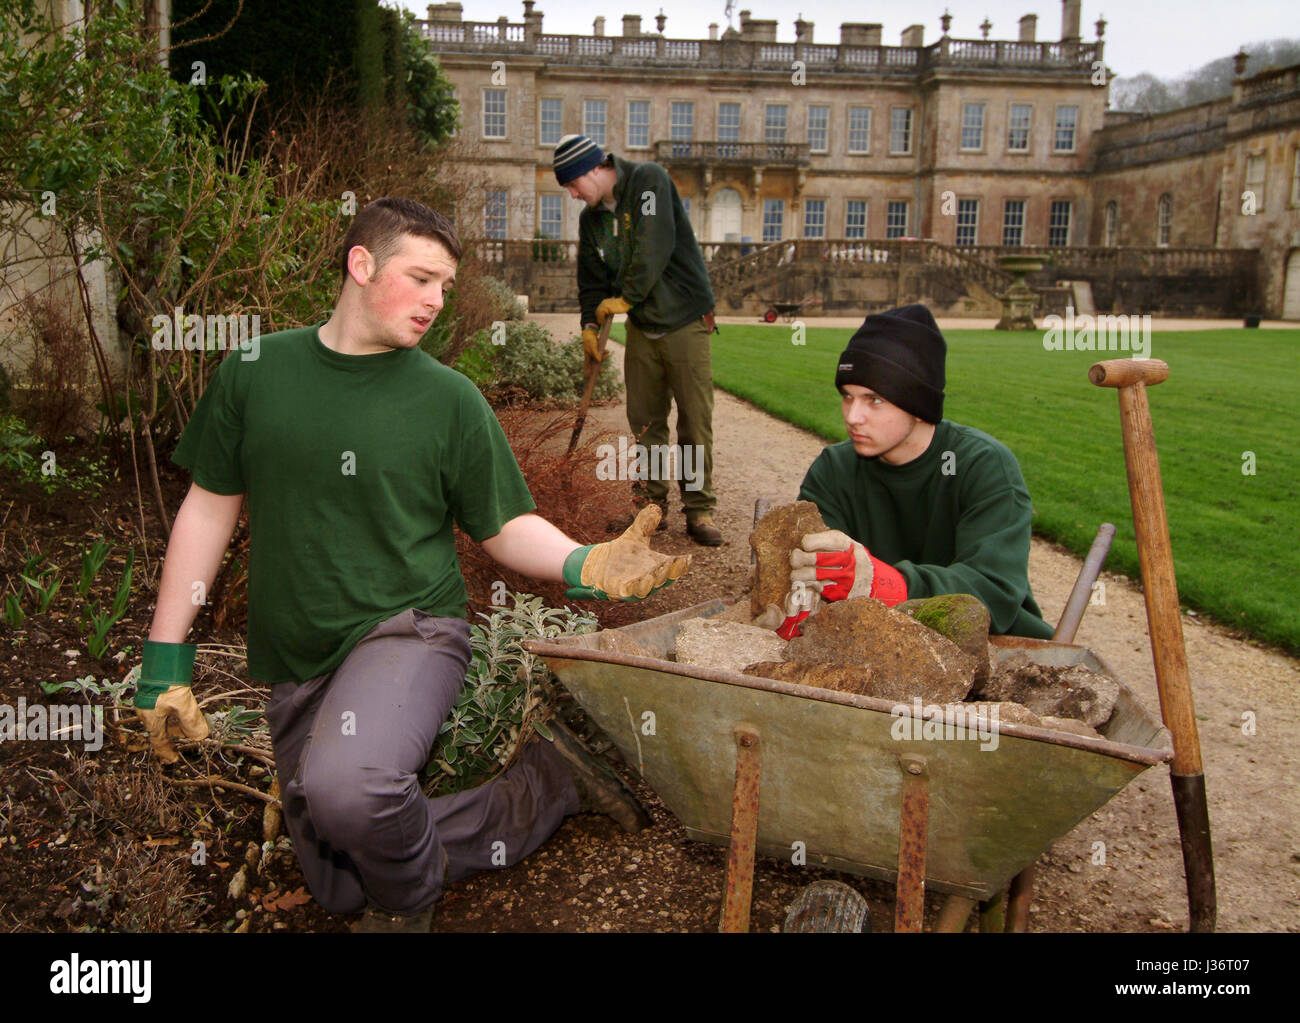 Tom Underwood (plain hat) and Ben Lewis who are inmates of Ashfield Young Offenders Institute working in Dyrham Park, with Nathan Bengey (striped hat) Stock Photo